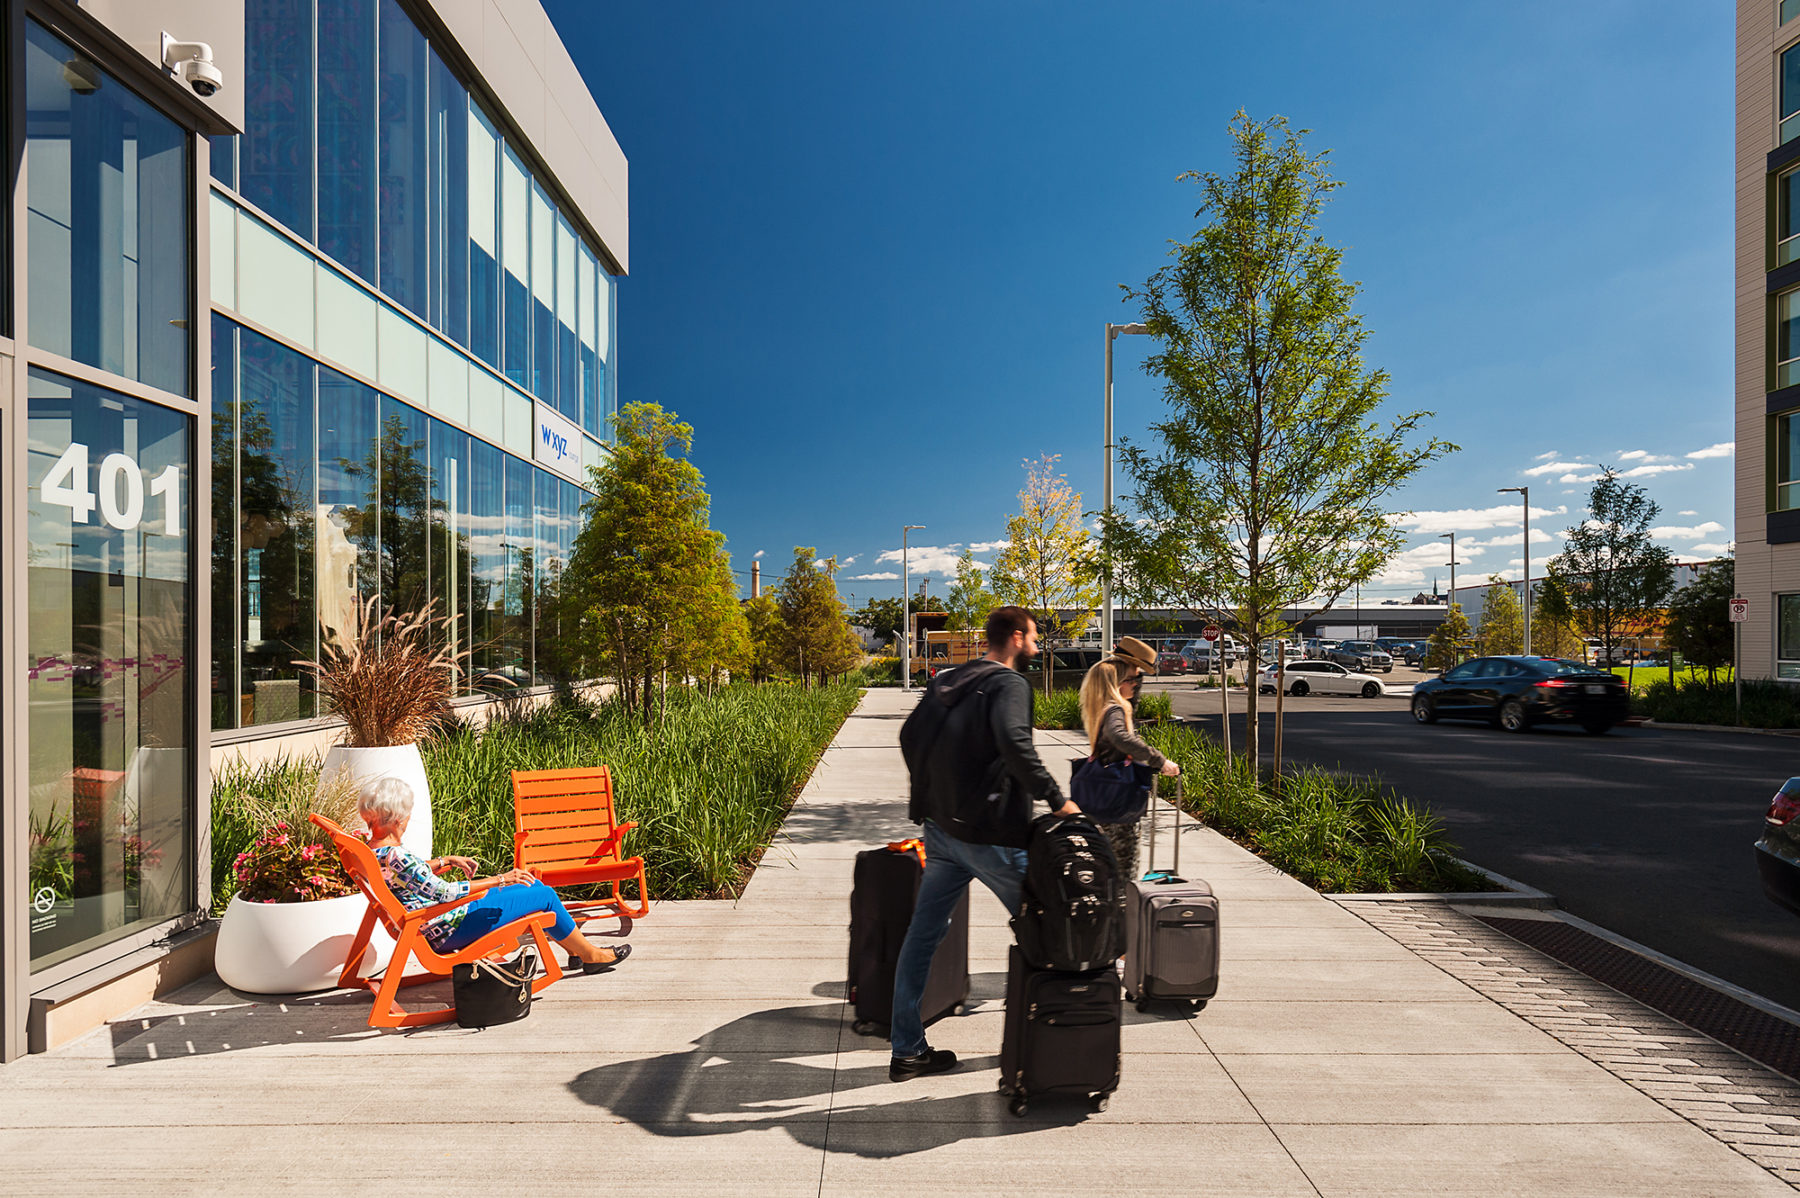 Photo of a couple exiting hotel with luggage. A woman sits in an orange chair on the sidewalk.